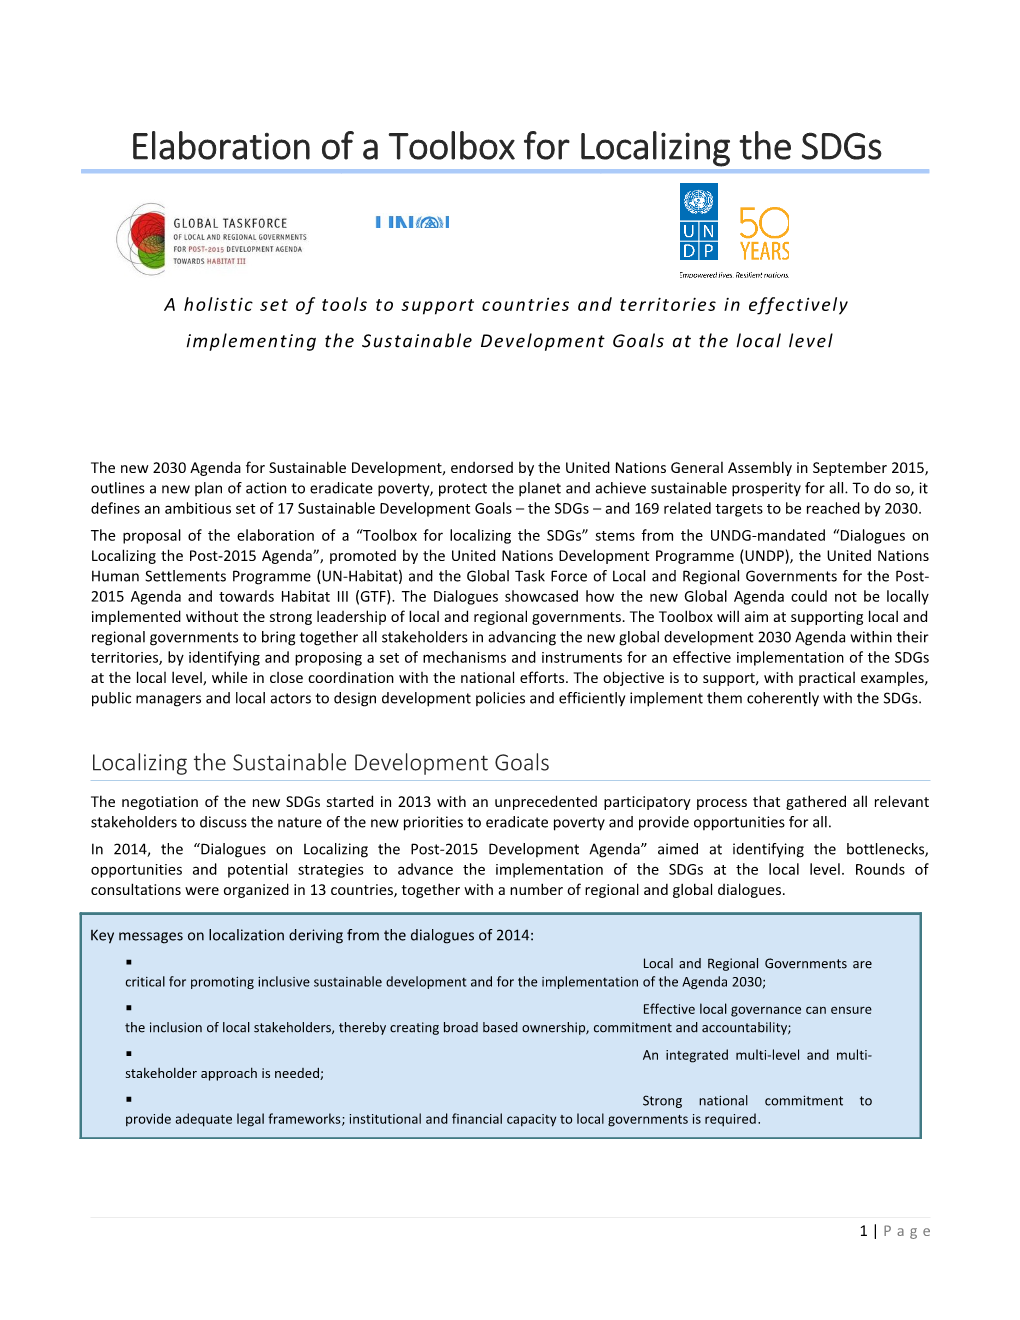 Elaboration of a Toolbox for Localizing the Sdgs